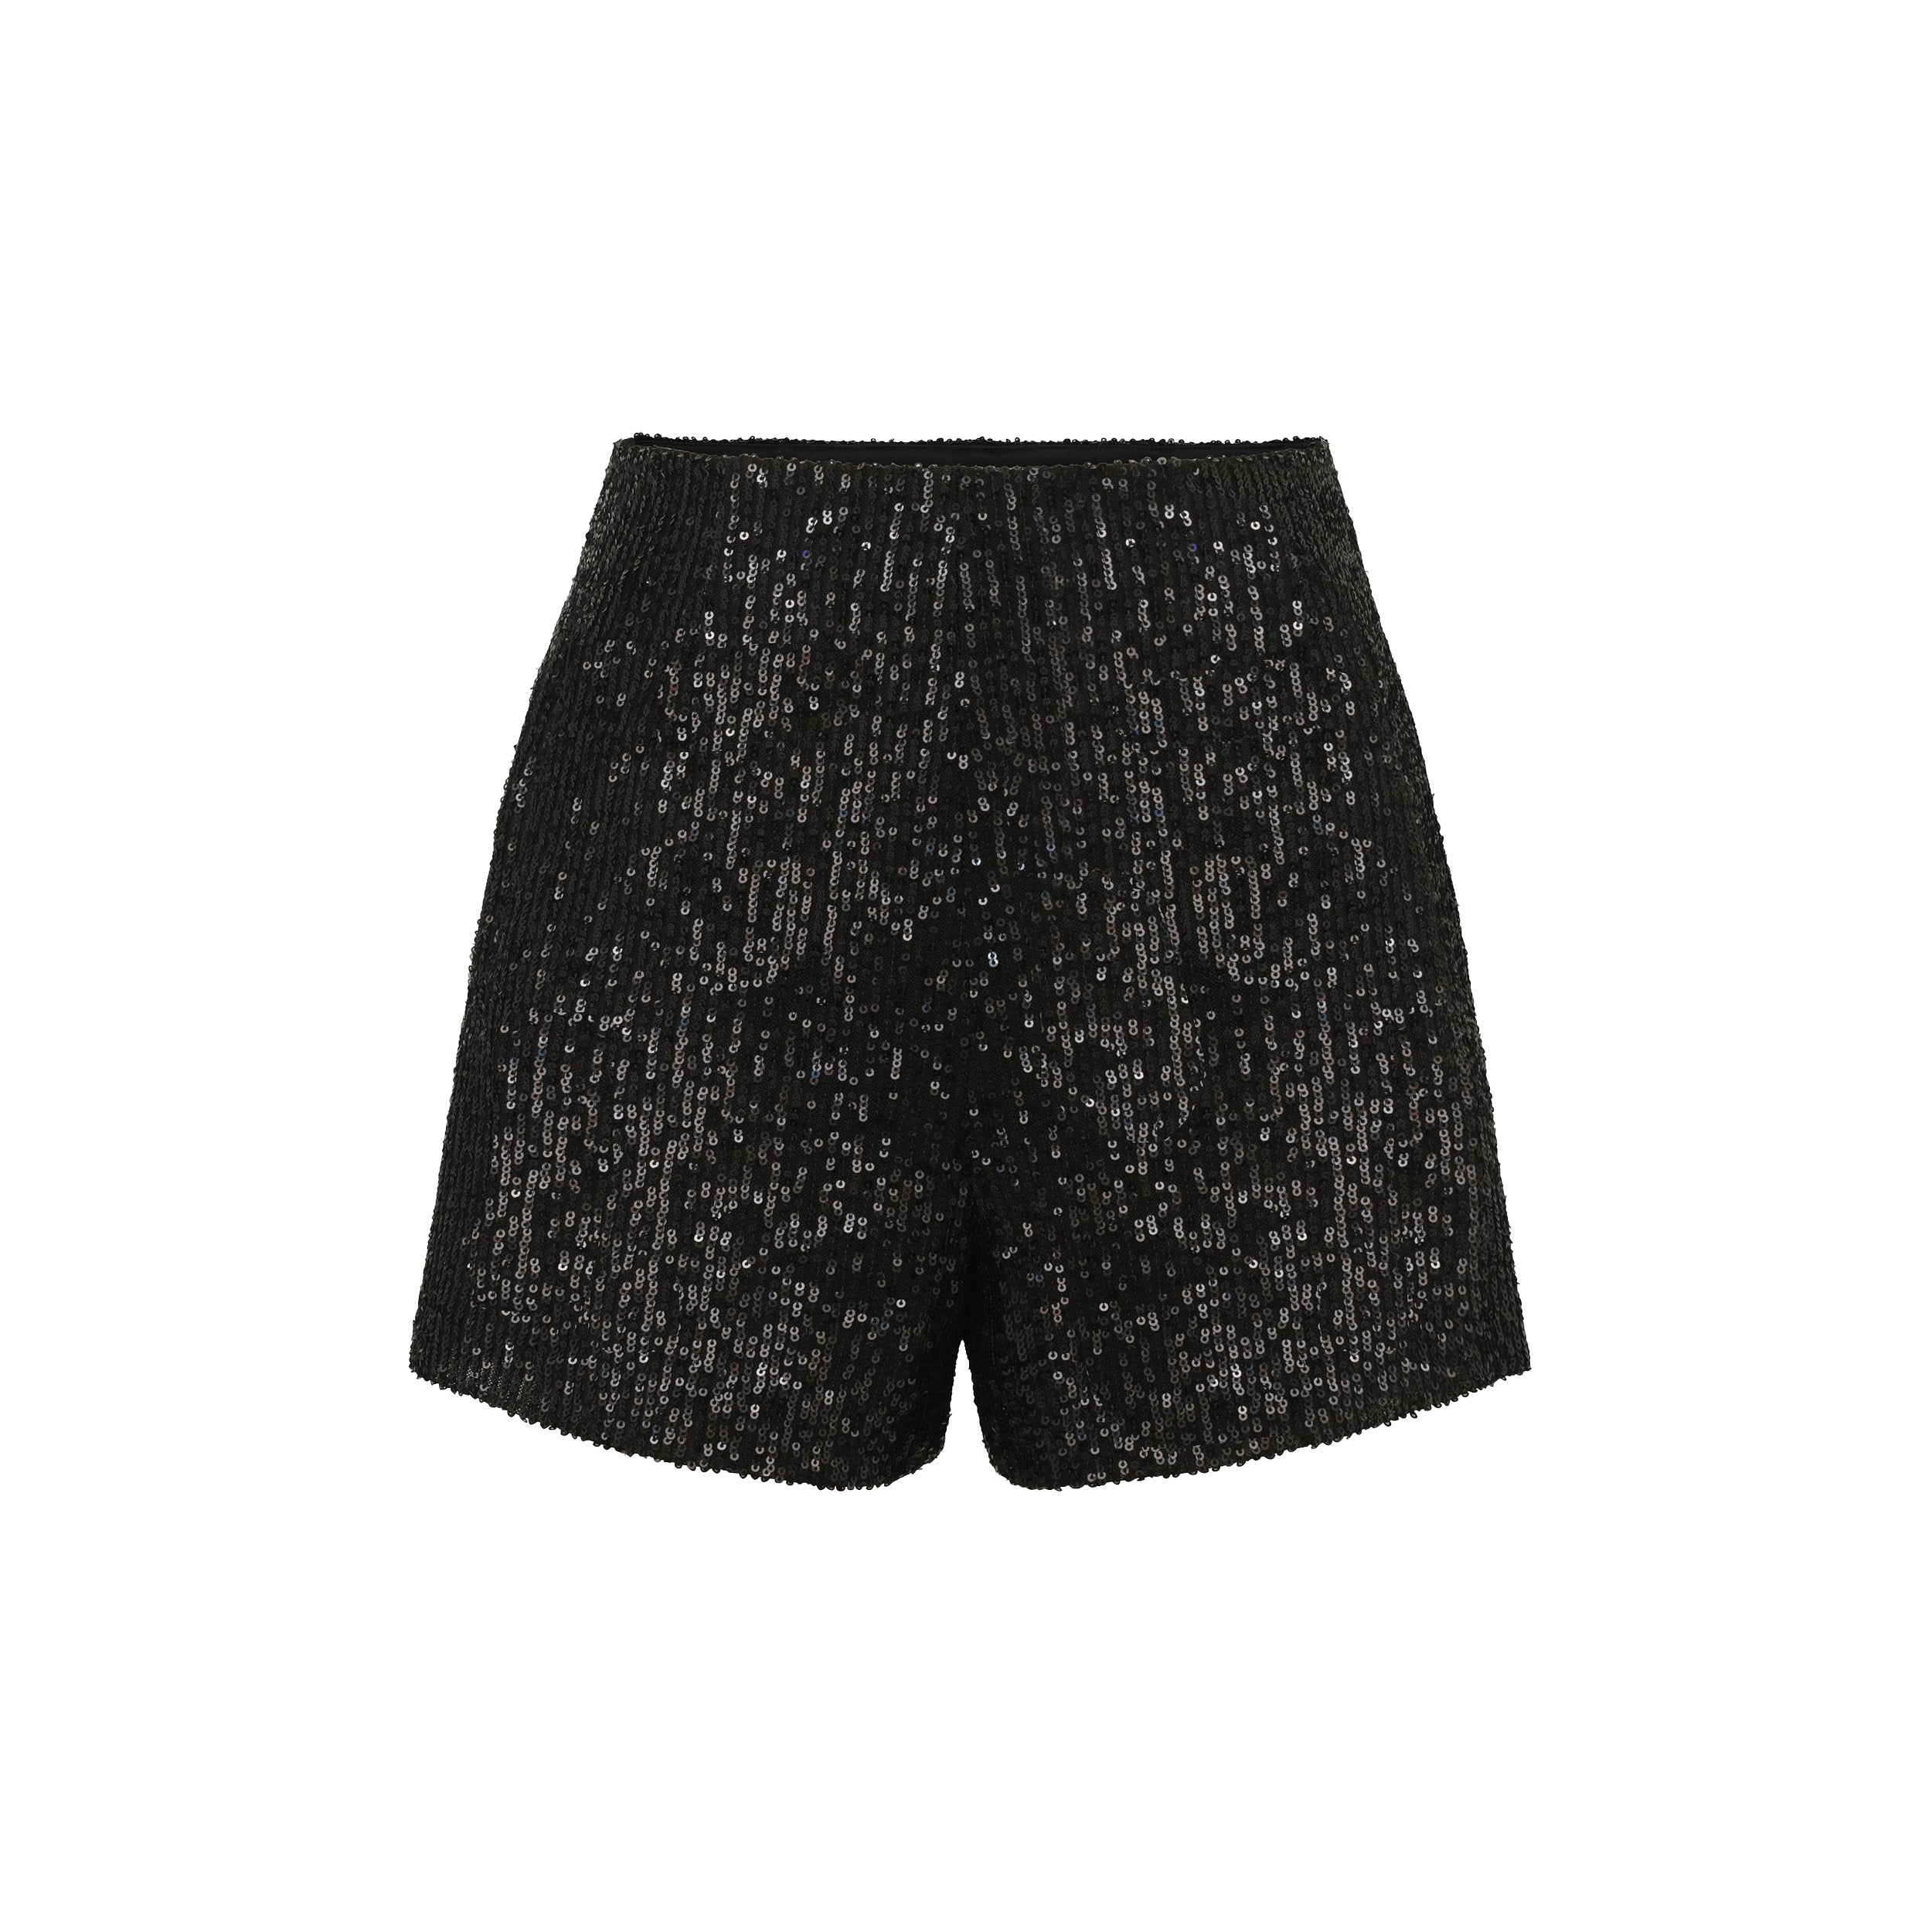 Product view of black shorts with lustrous sequin embroidery